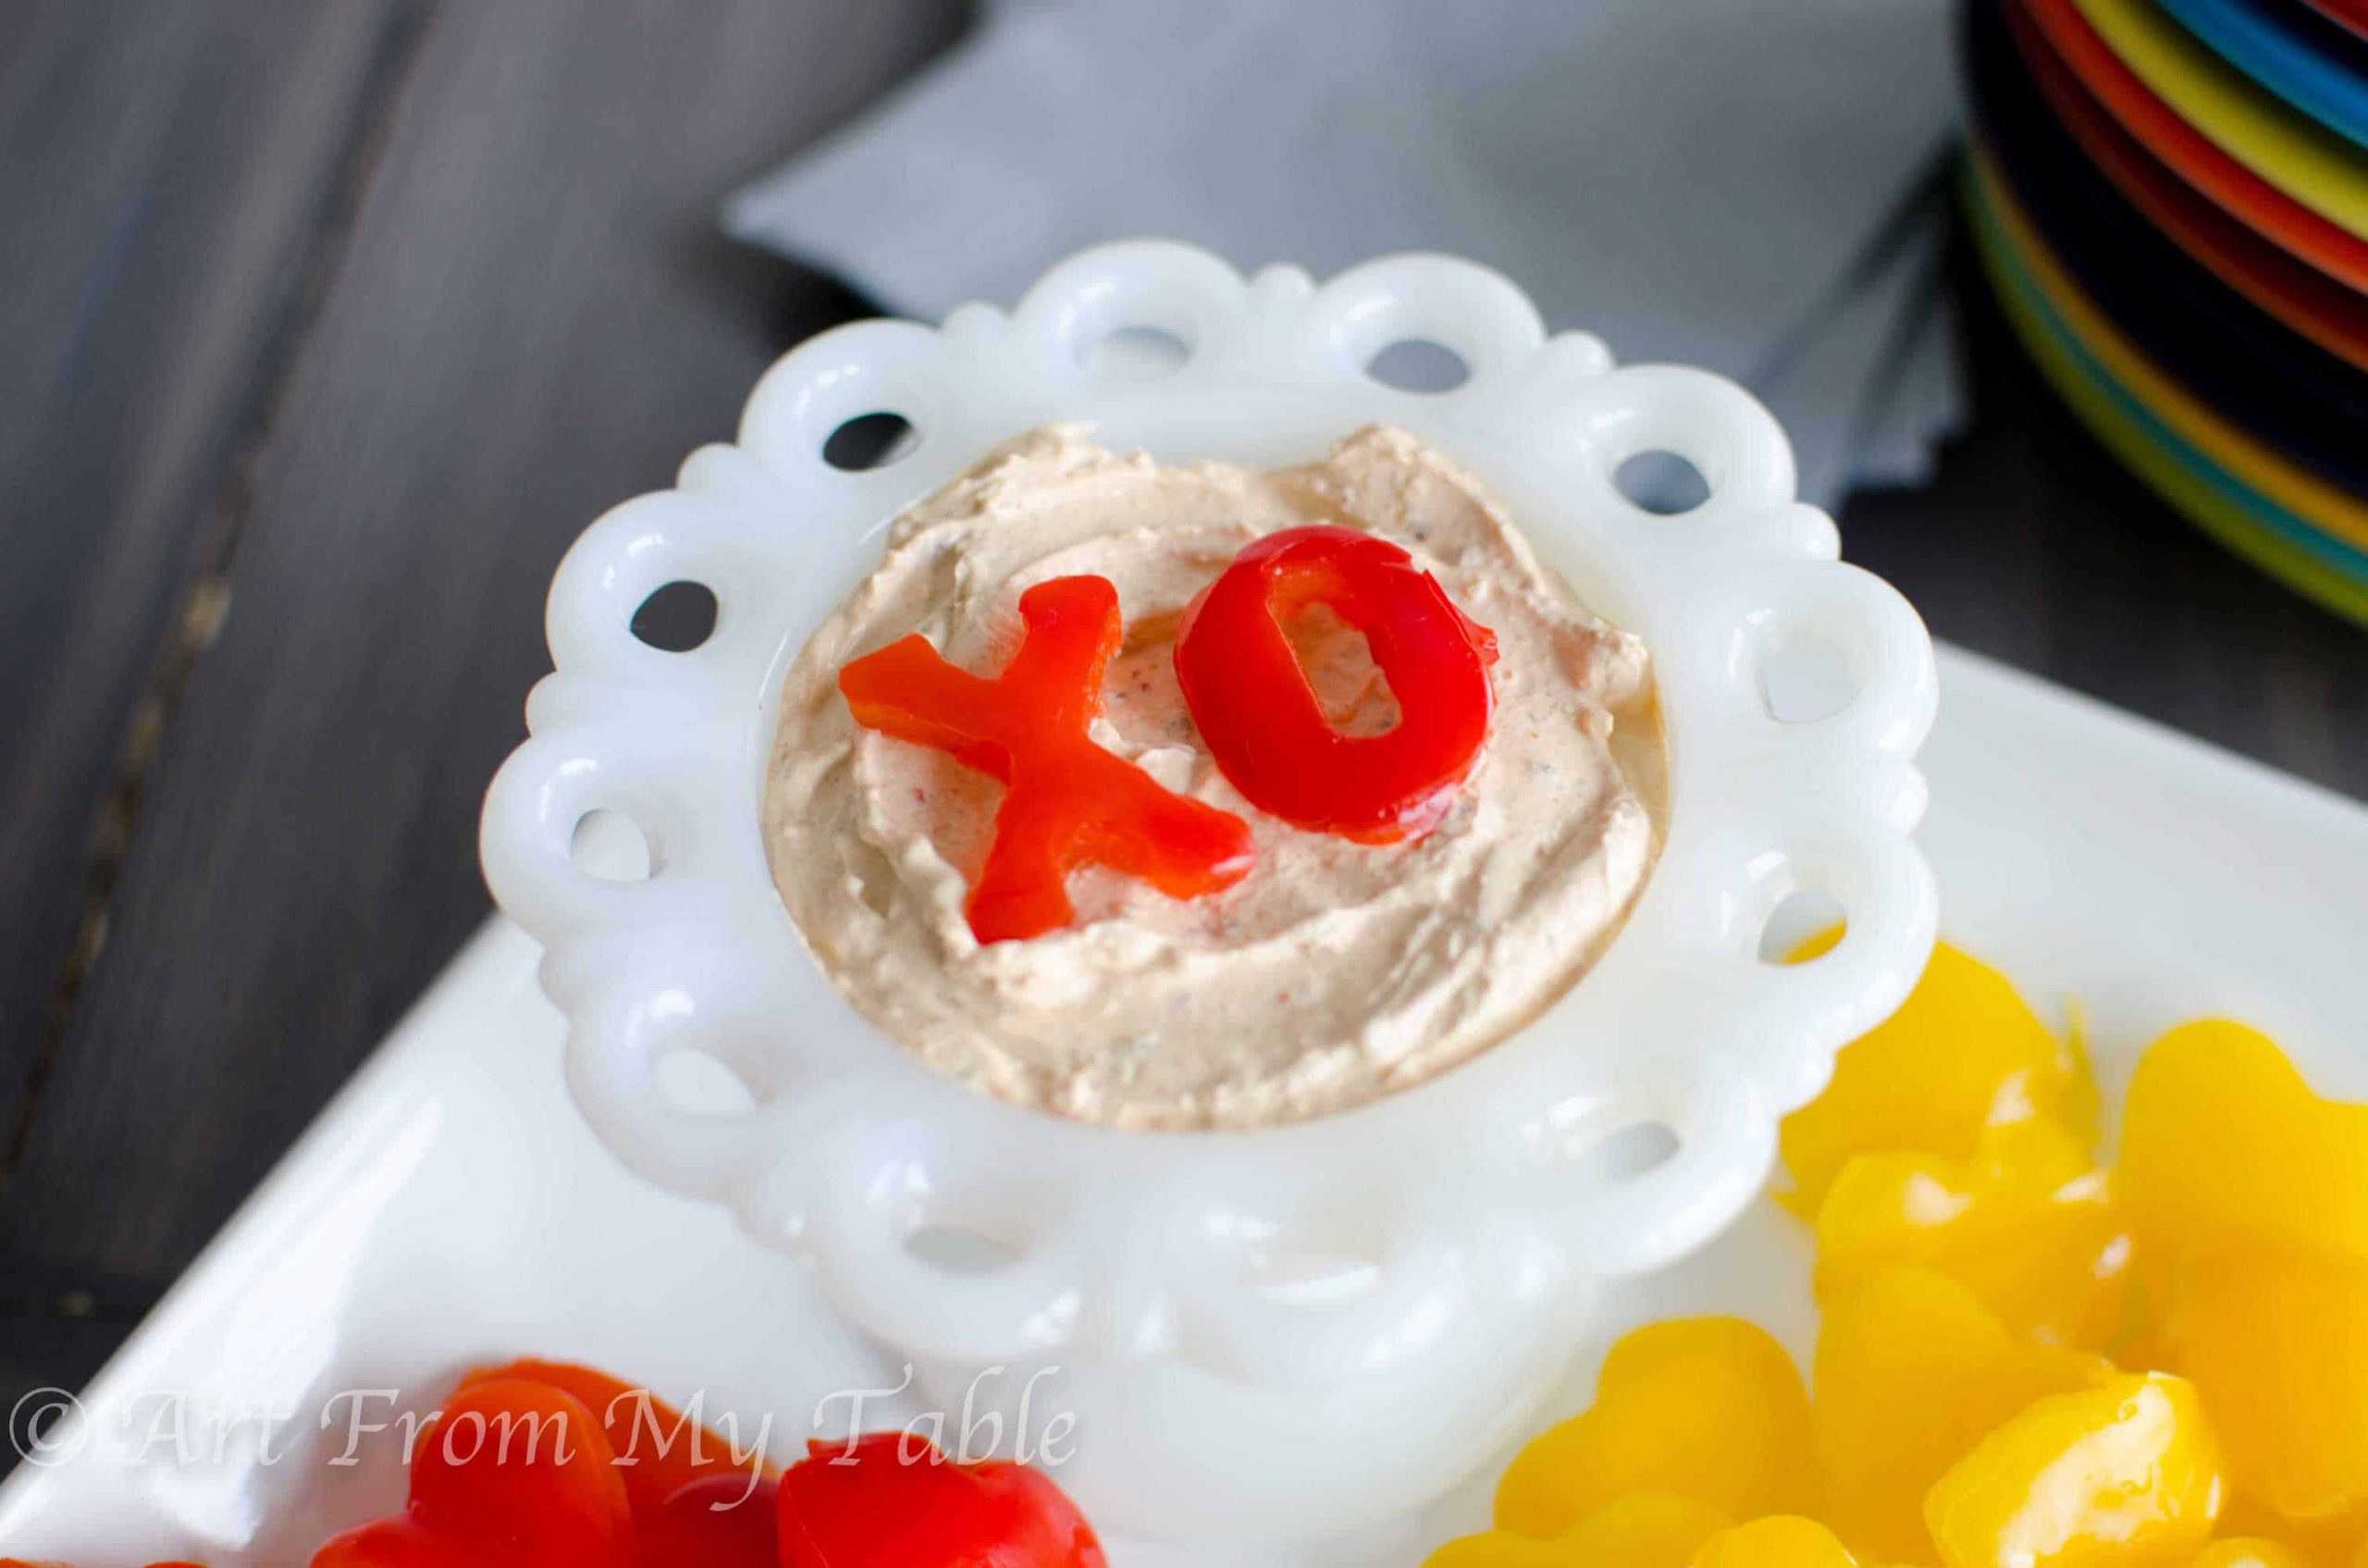 'X' and 'O' cut out of a red bell pepper and placed on top of a healthy vegetable dip for Valentines Day.